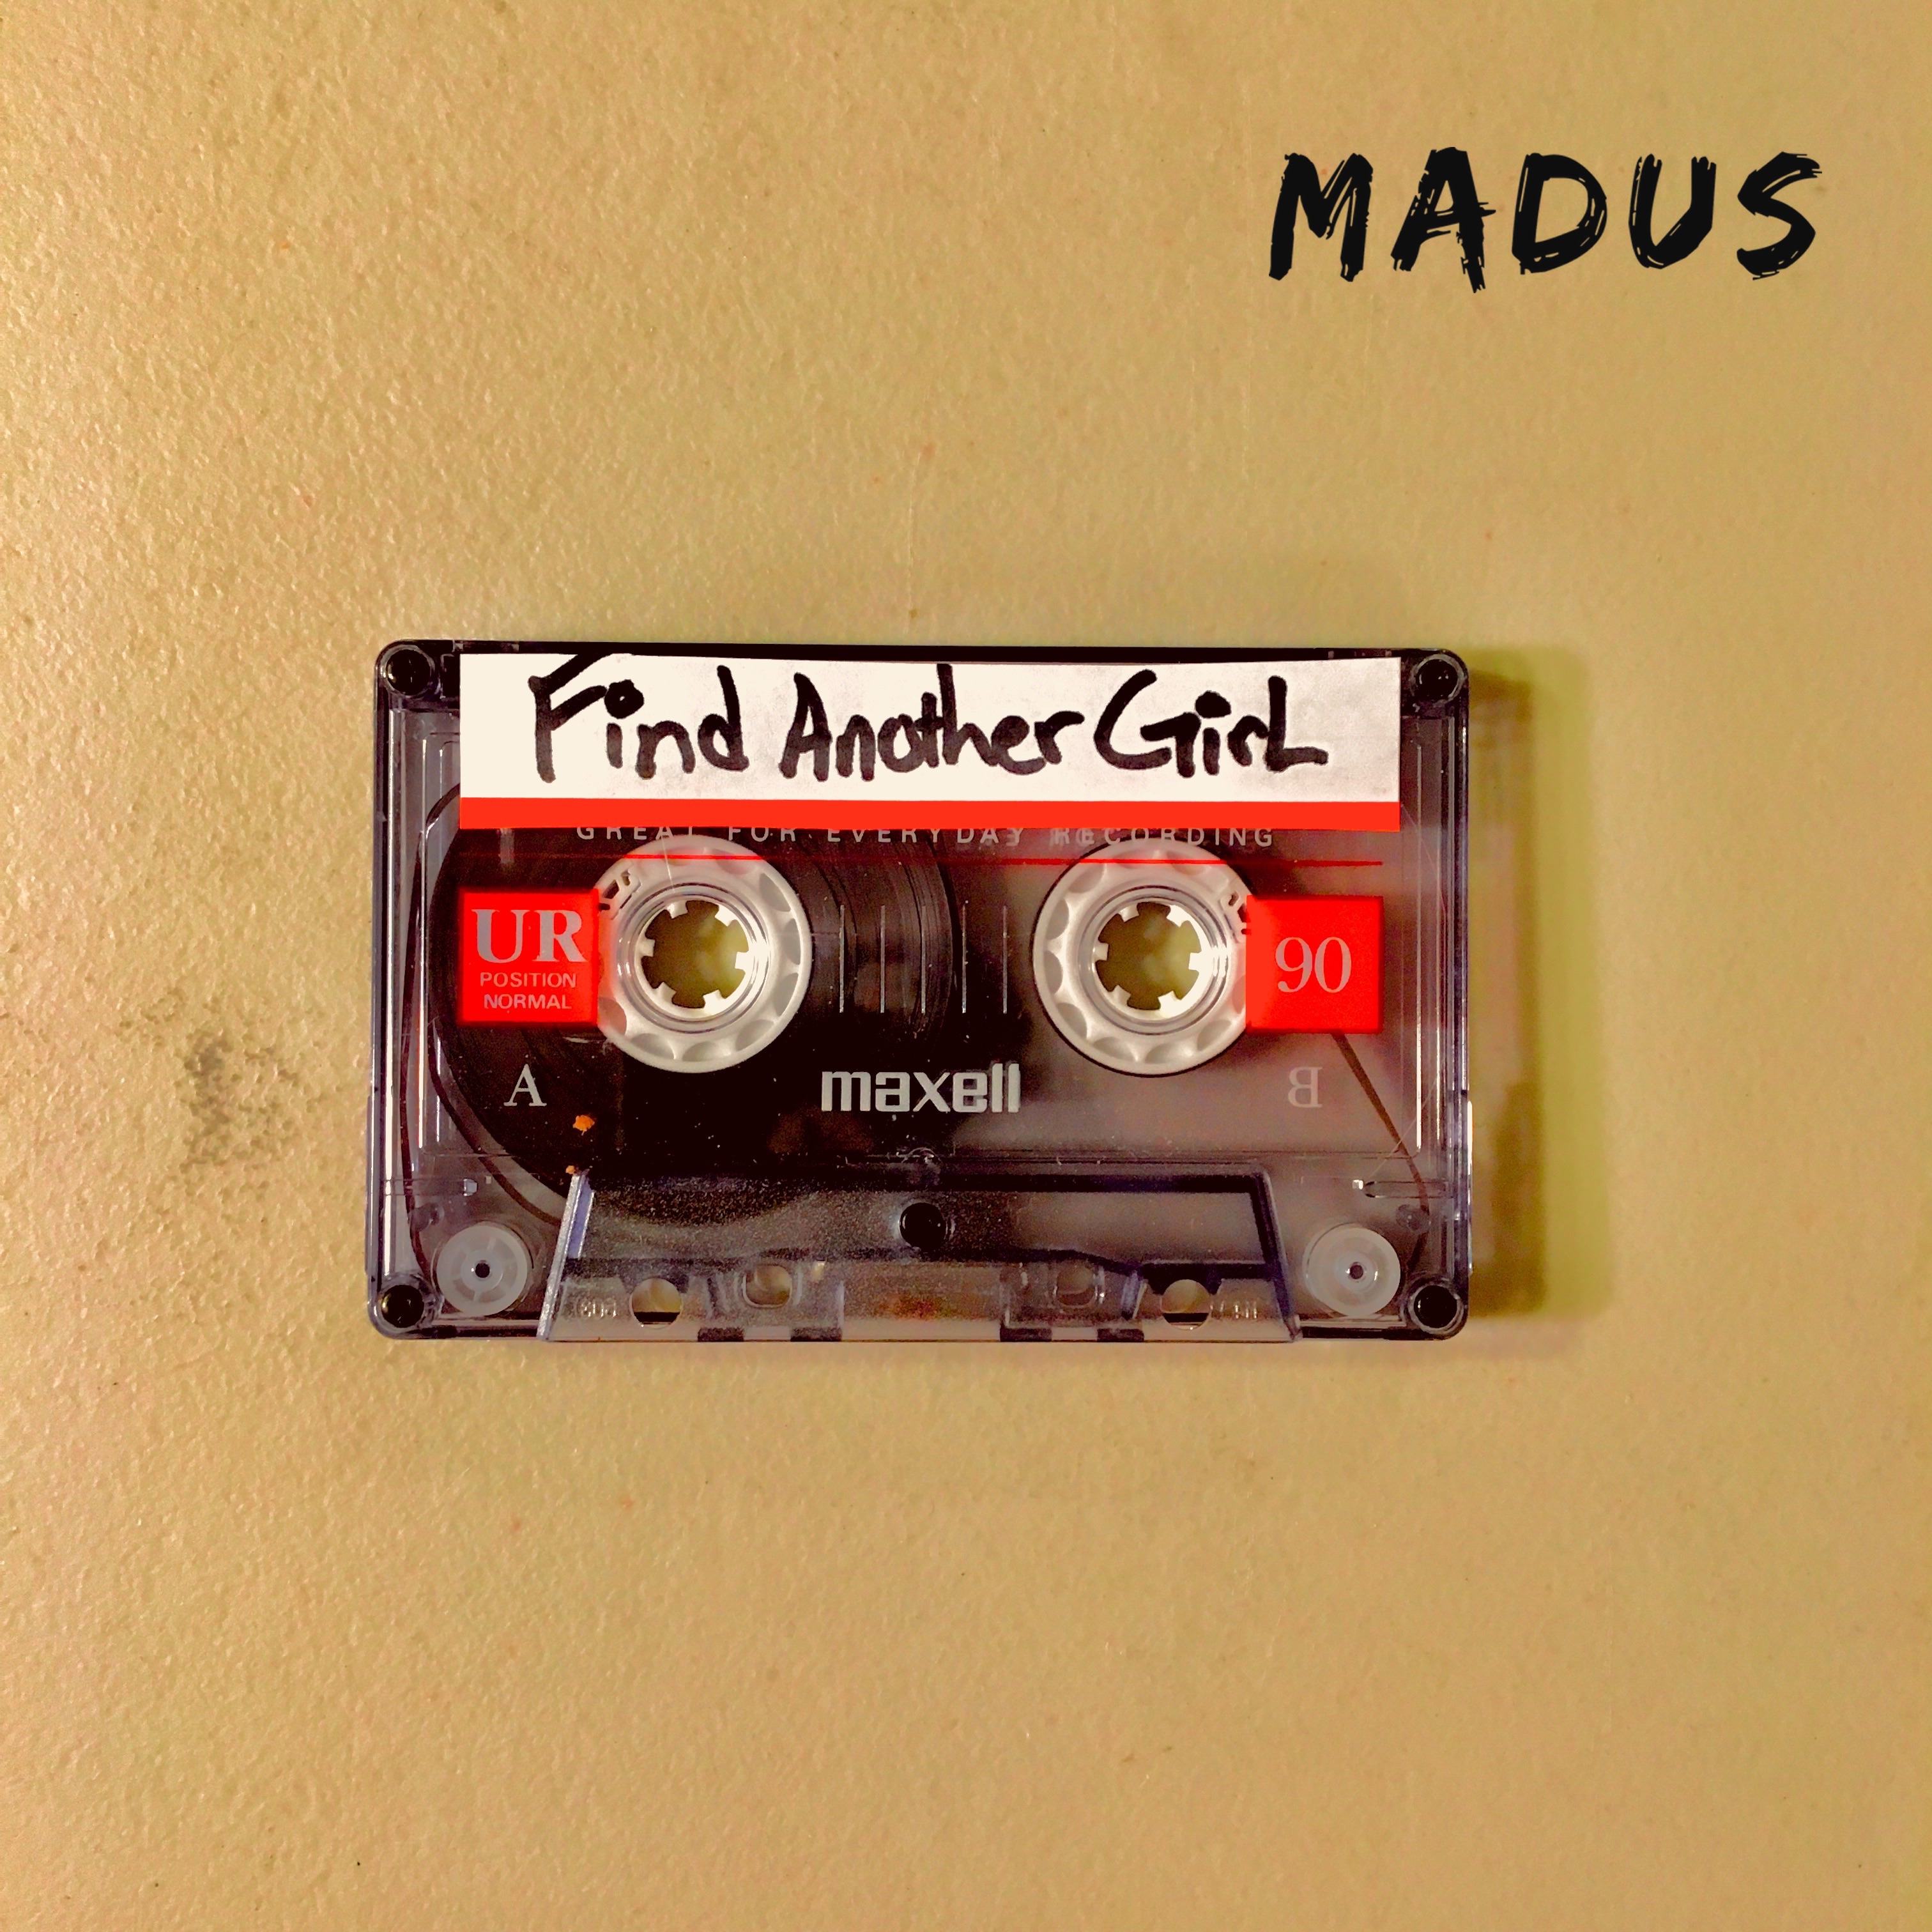 MADUS – “Find Another Girl”